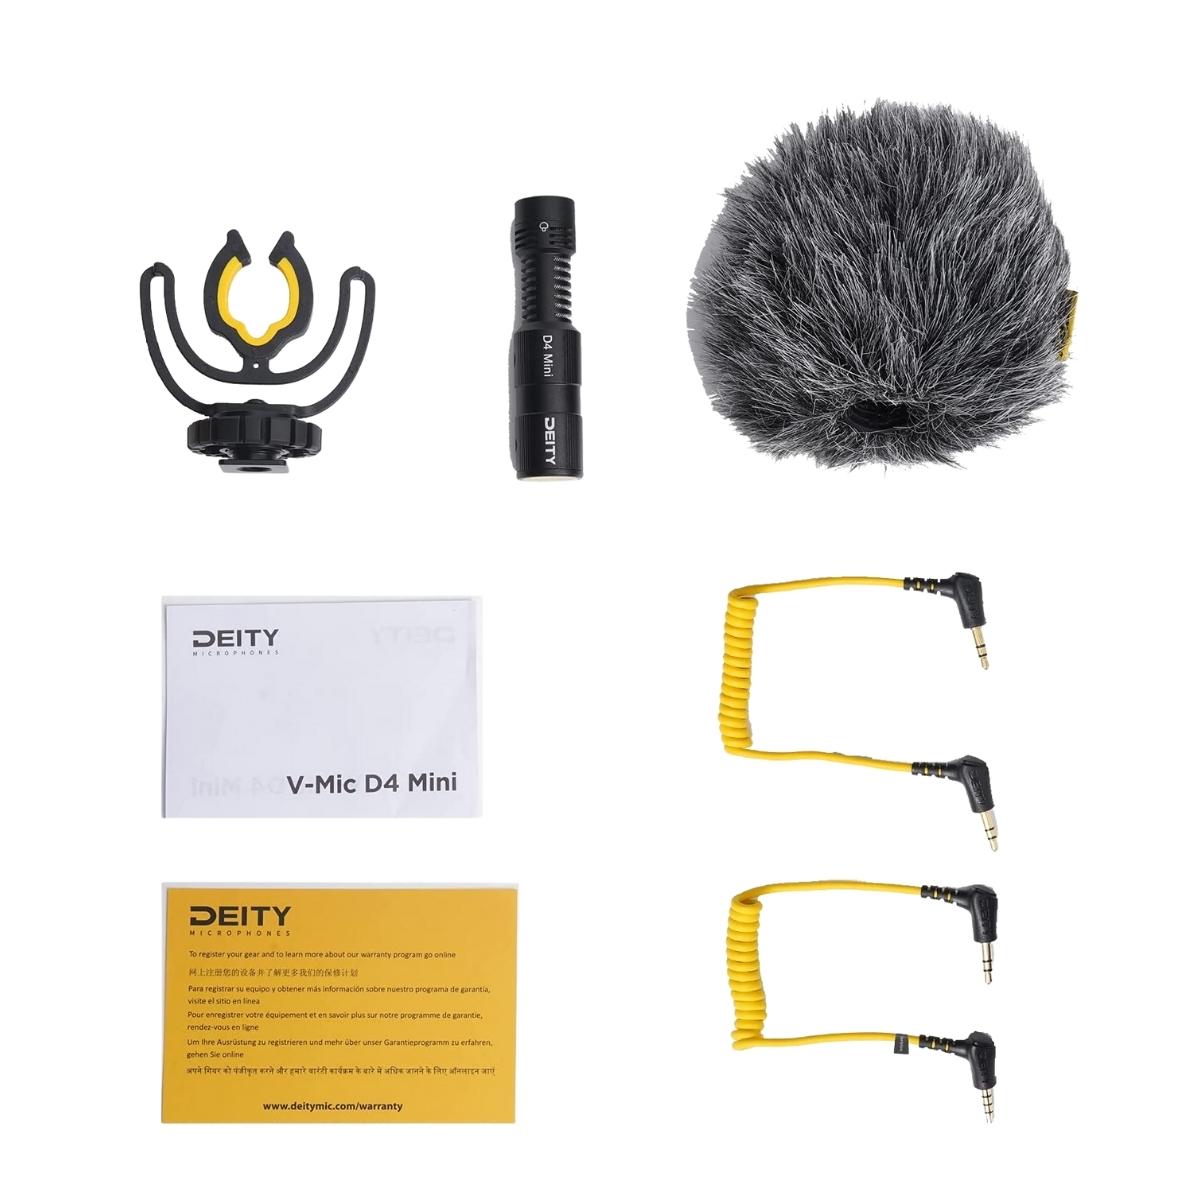 Deity V-Mic D4 Mini Audio Video Condenser Microphone with 20mph Wind Rating, AUX 3.5mm Input, 74dB Noise Ratio Camera-Mount Shotgun Mic